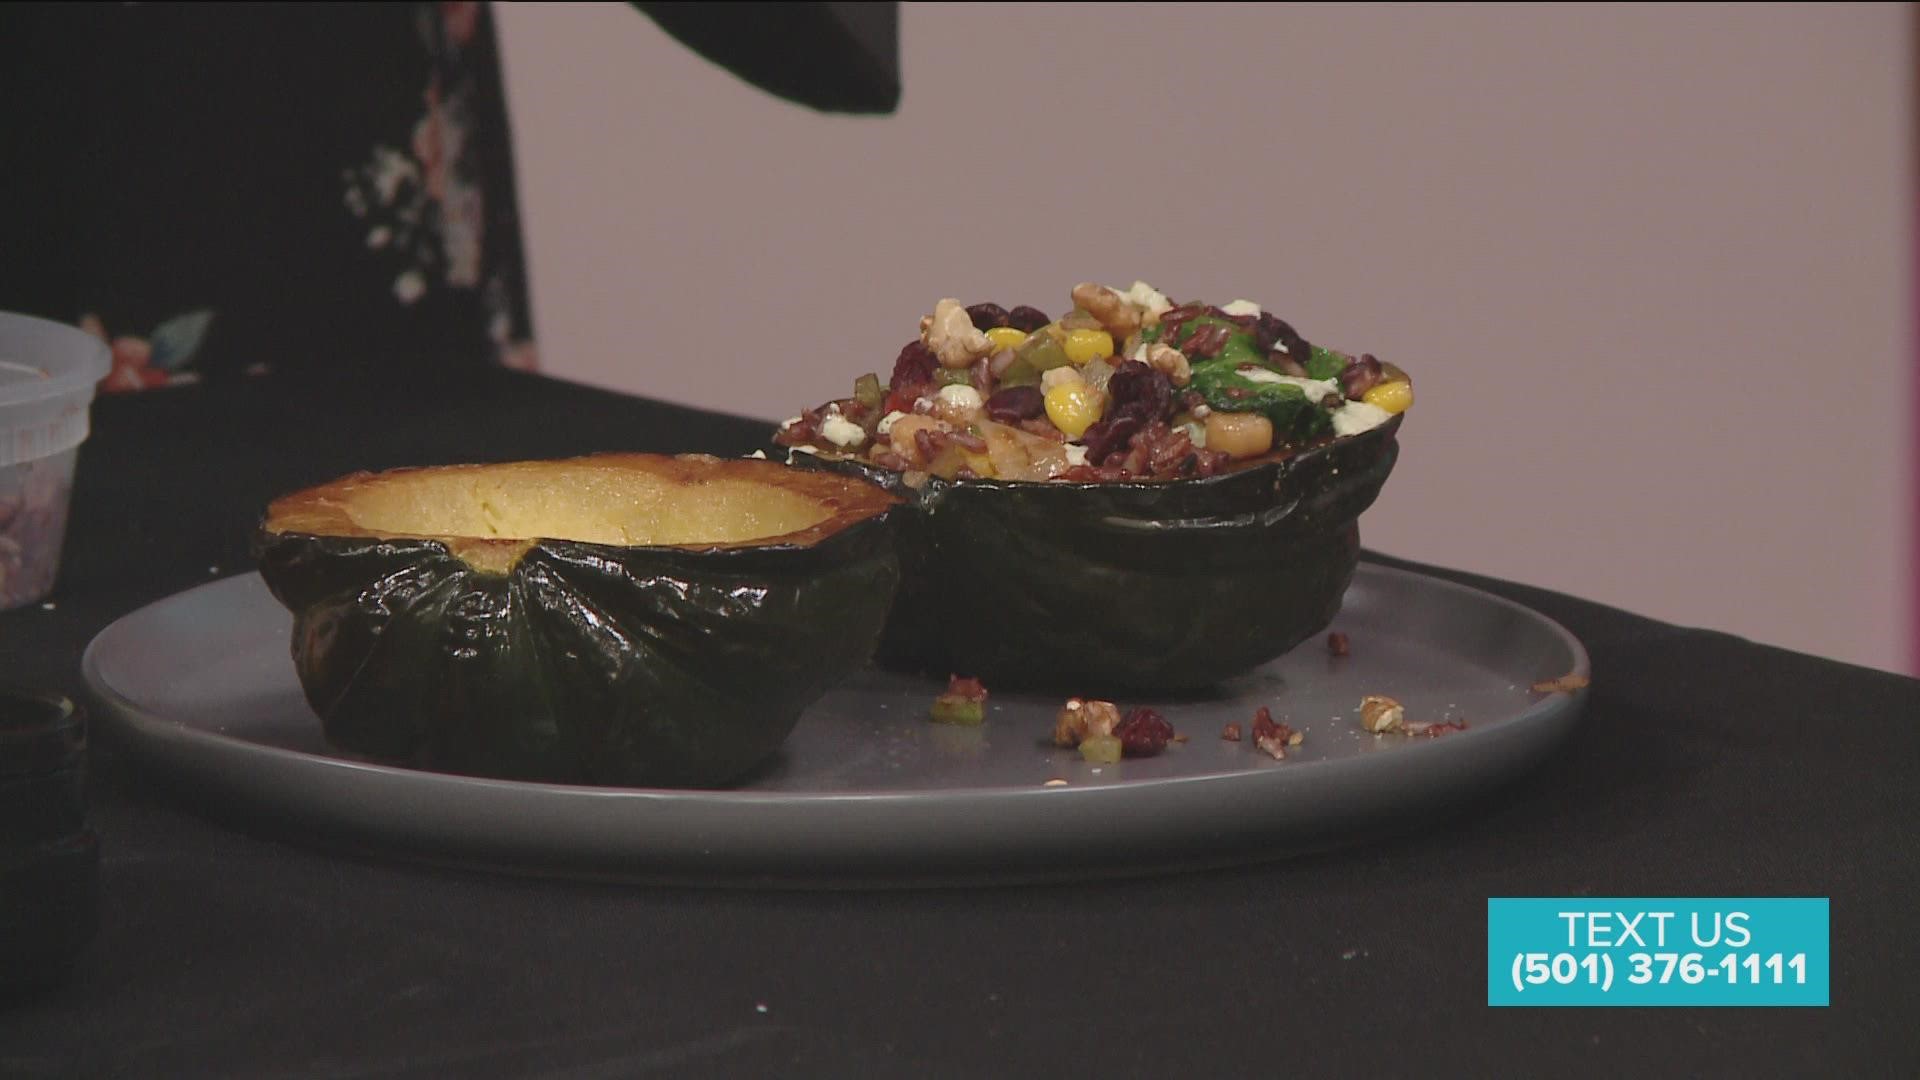 Chef Serge is back with another delicious recipe!